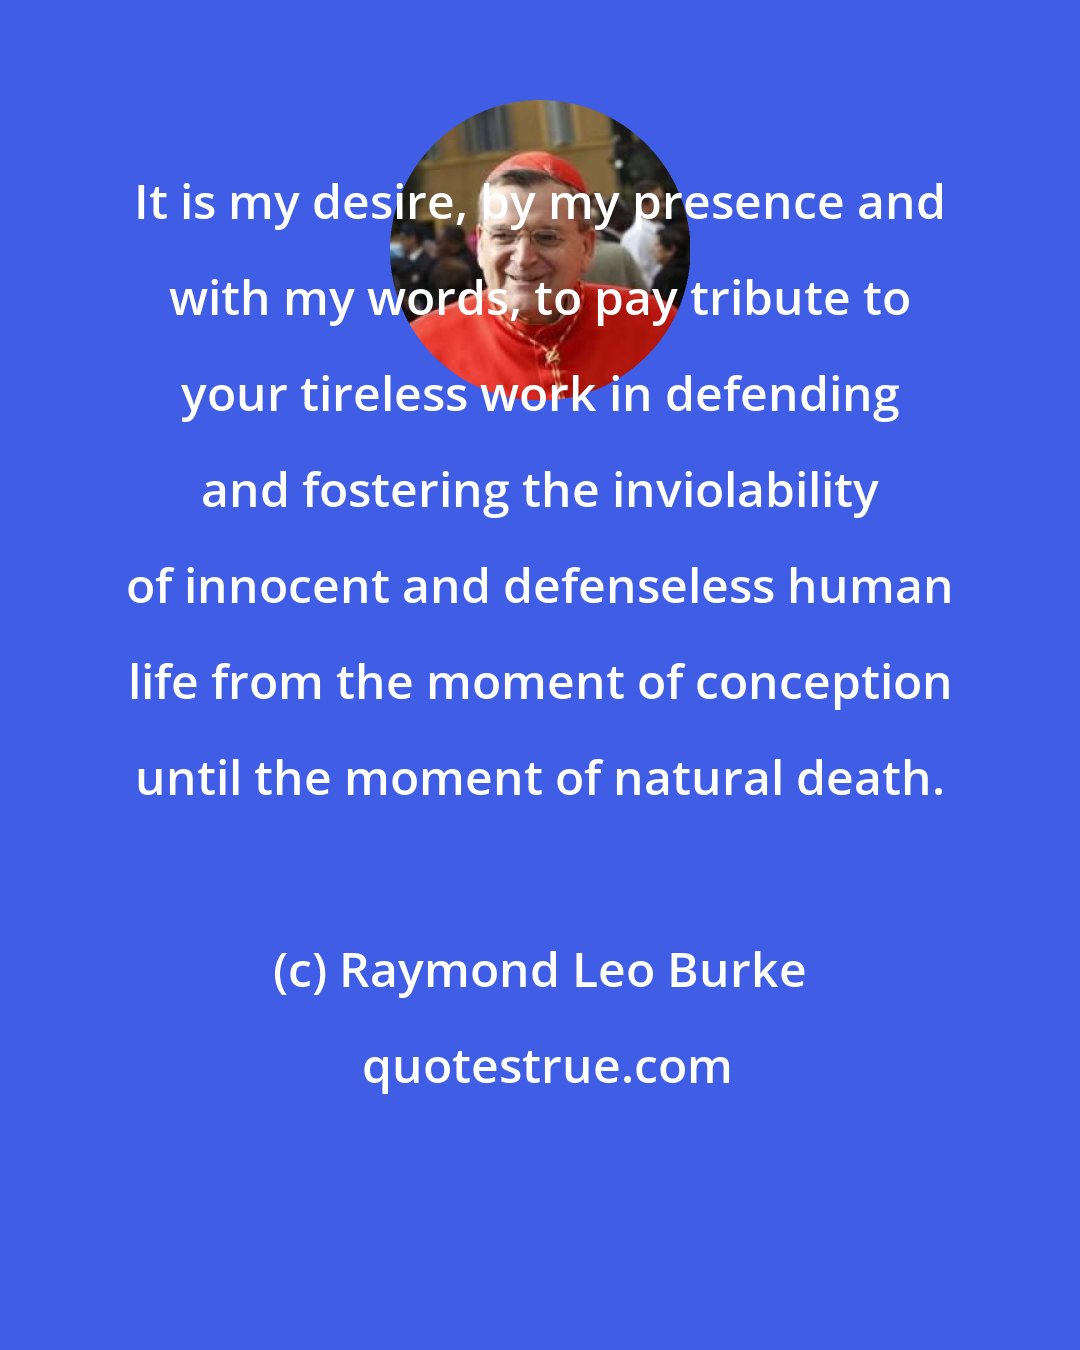 Raymond Leo Burke: It is my desire, by my presence and with my words, to pay tribute to your tireless work in defending and fostering the inviolability of innocent and defenseless human life from the moment of conception until the moment of natural death.